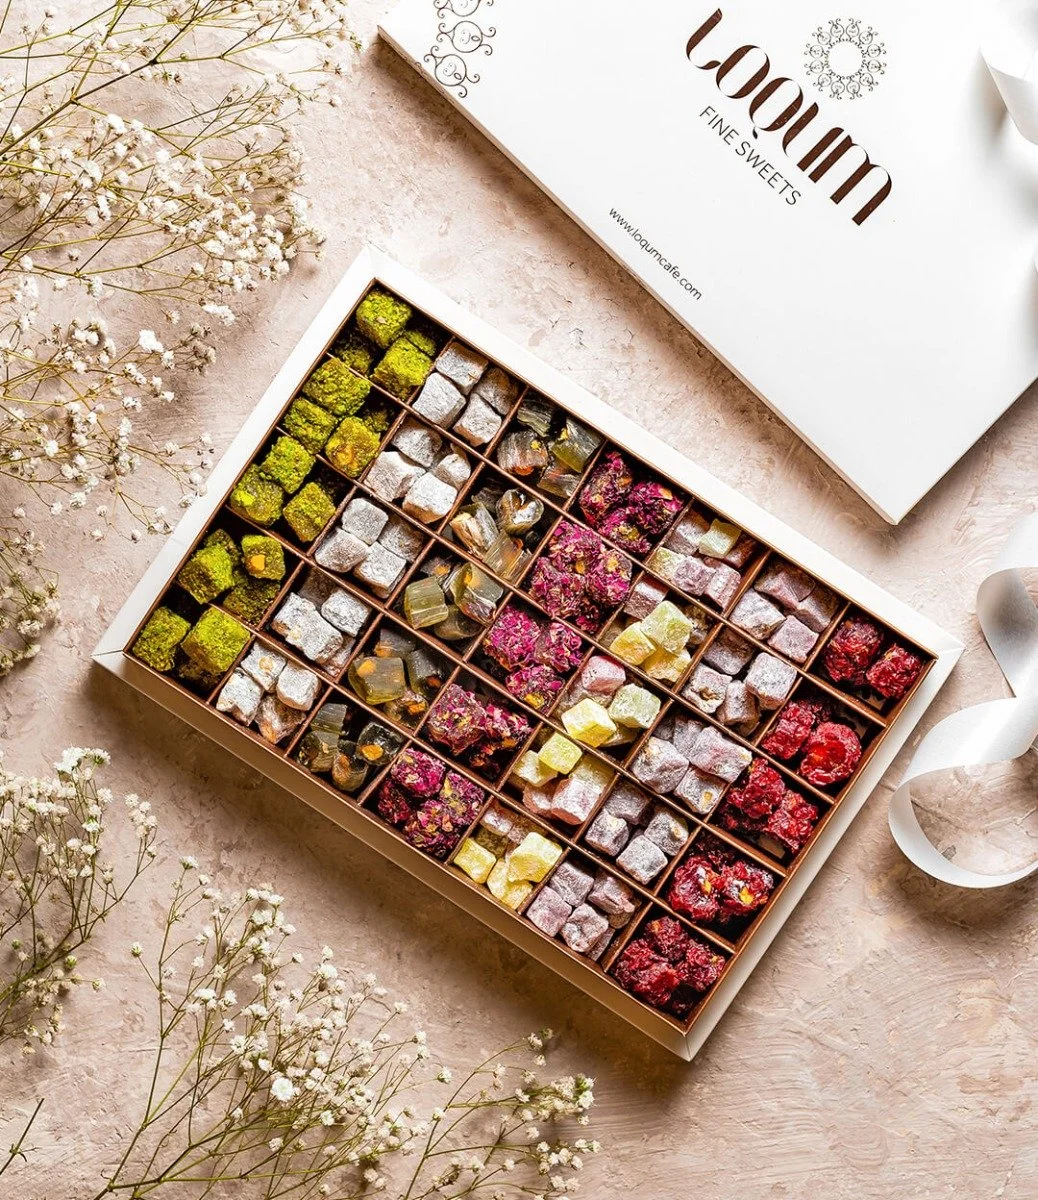 Turkish Delight With Nuts by Loqum